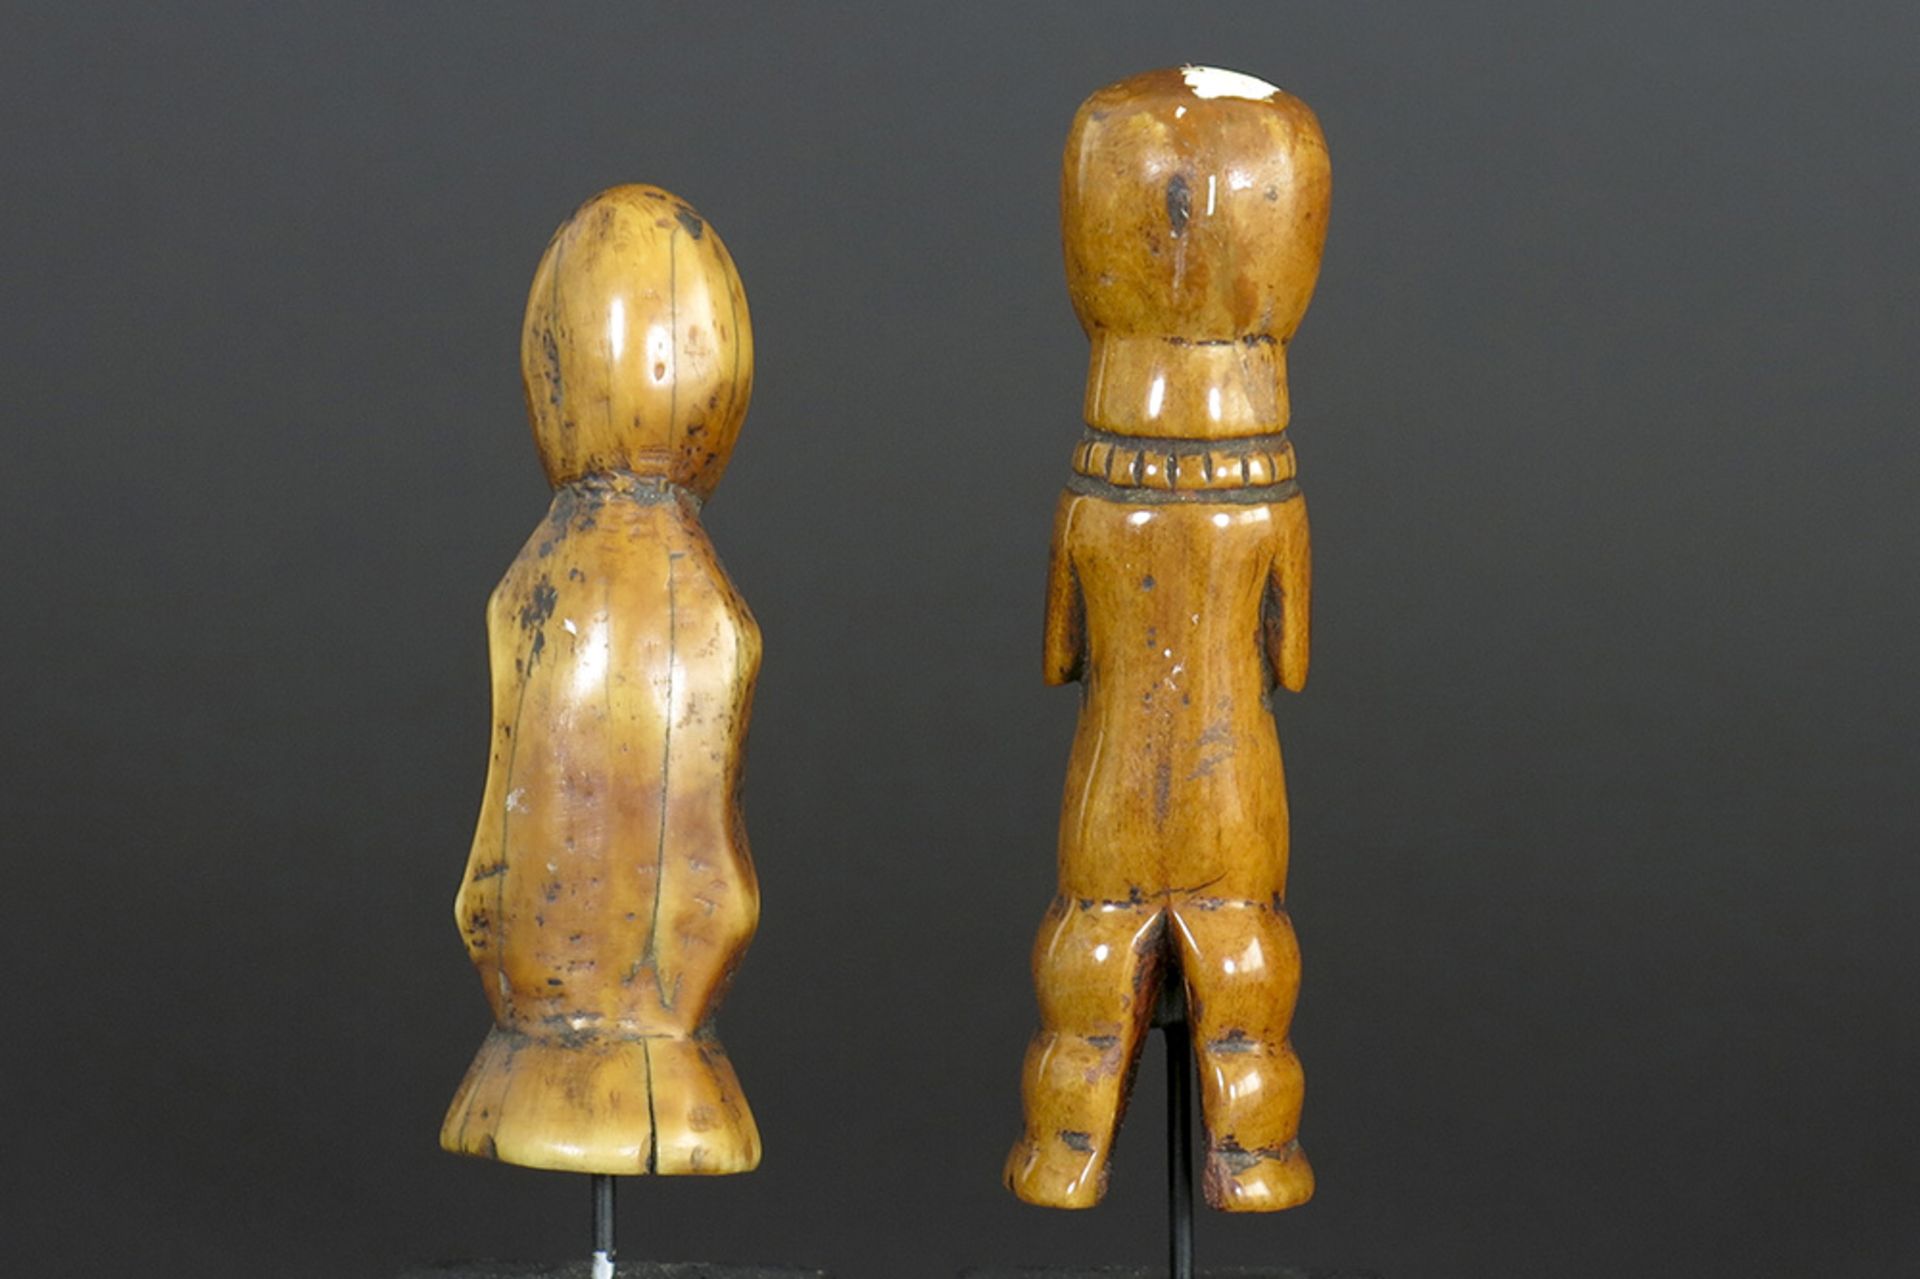 two African Congolese 'Lega' human figure sculptures in ivory with nice patina - one is the head - Image 2 of 3